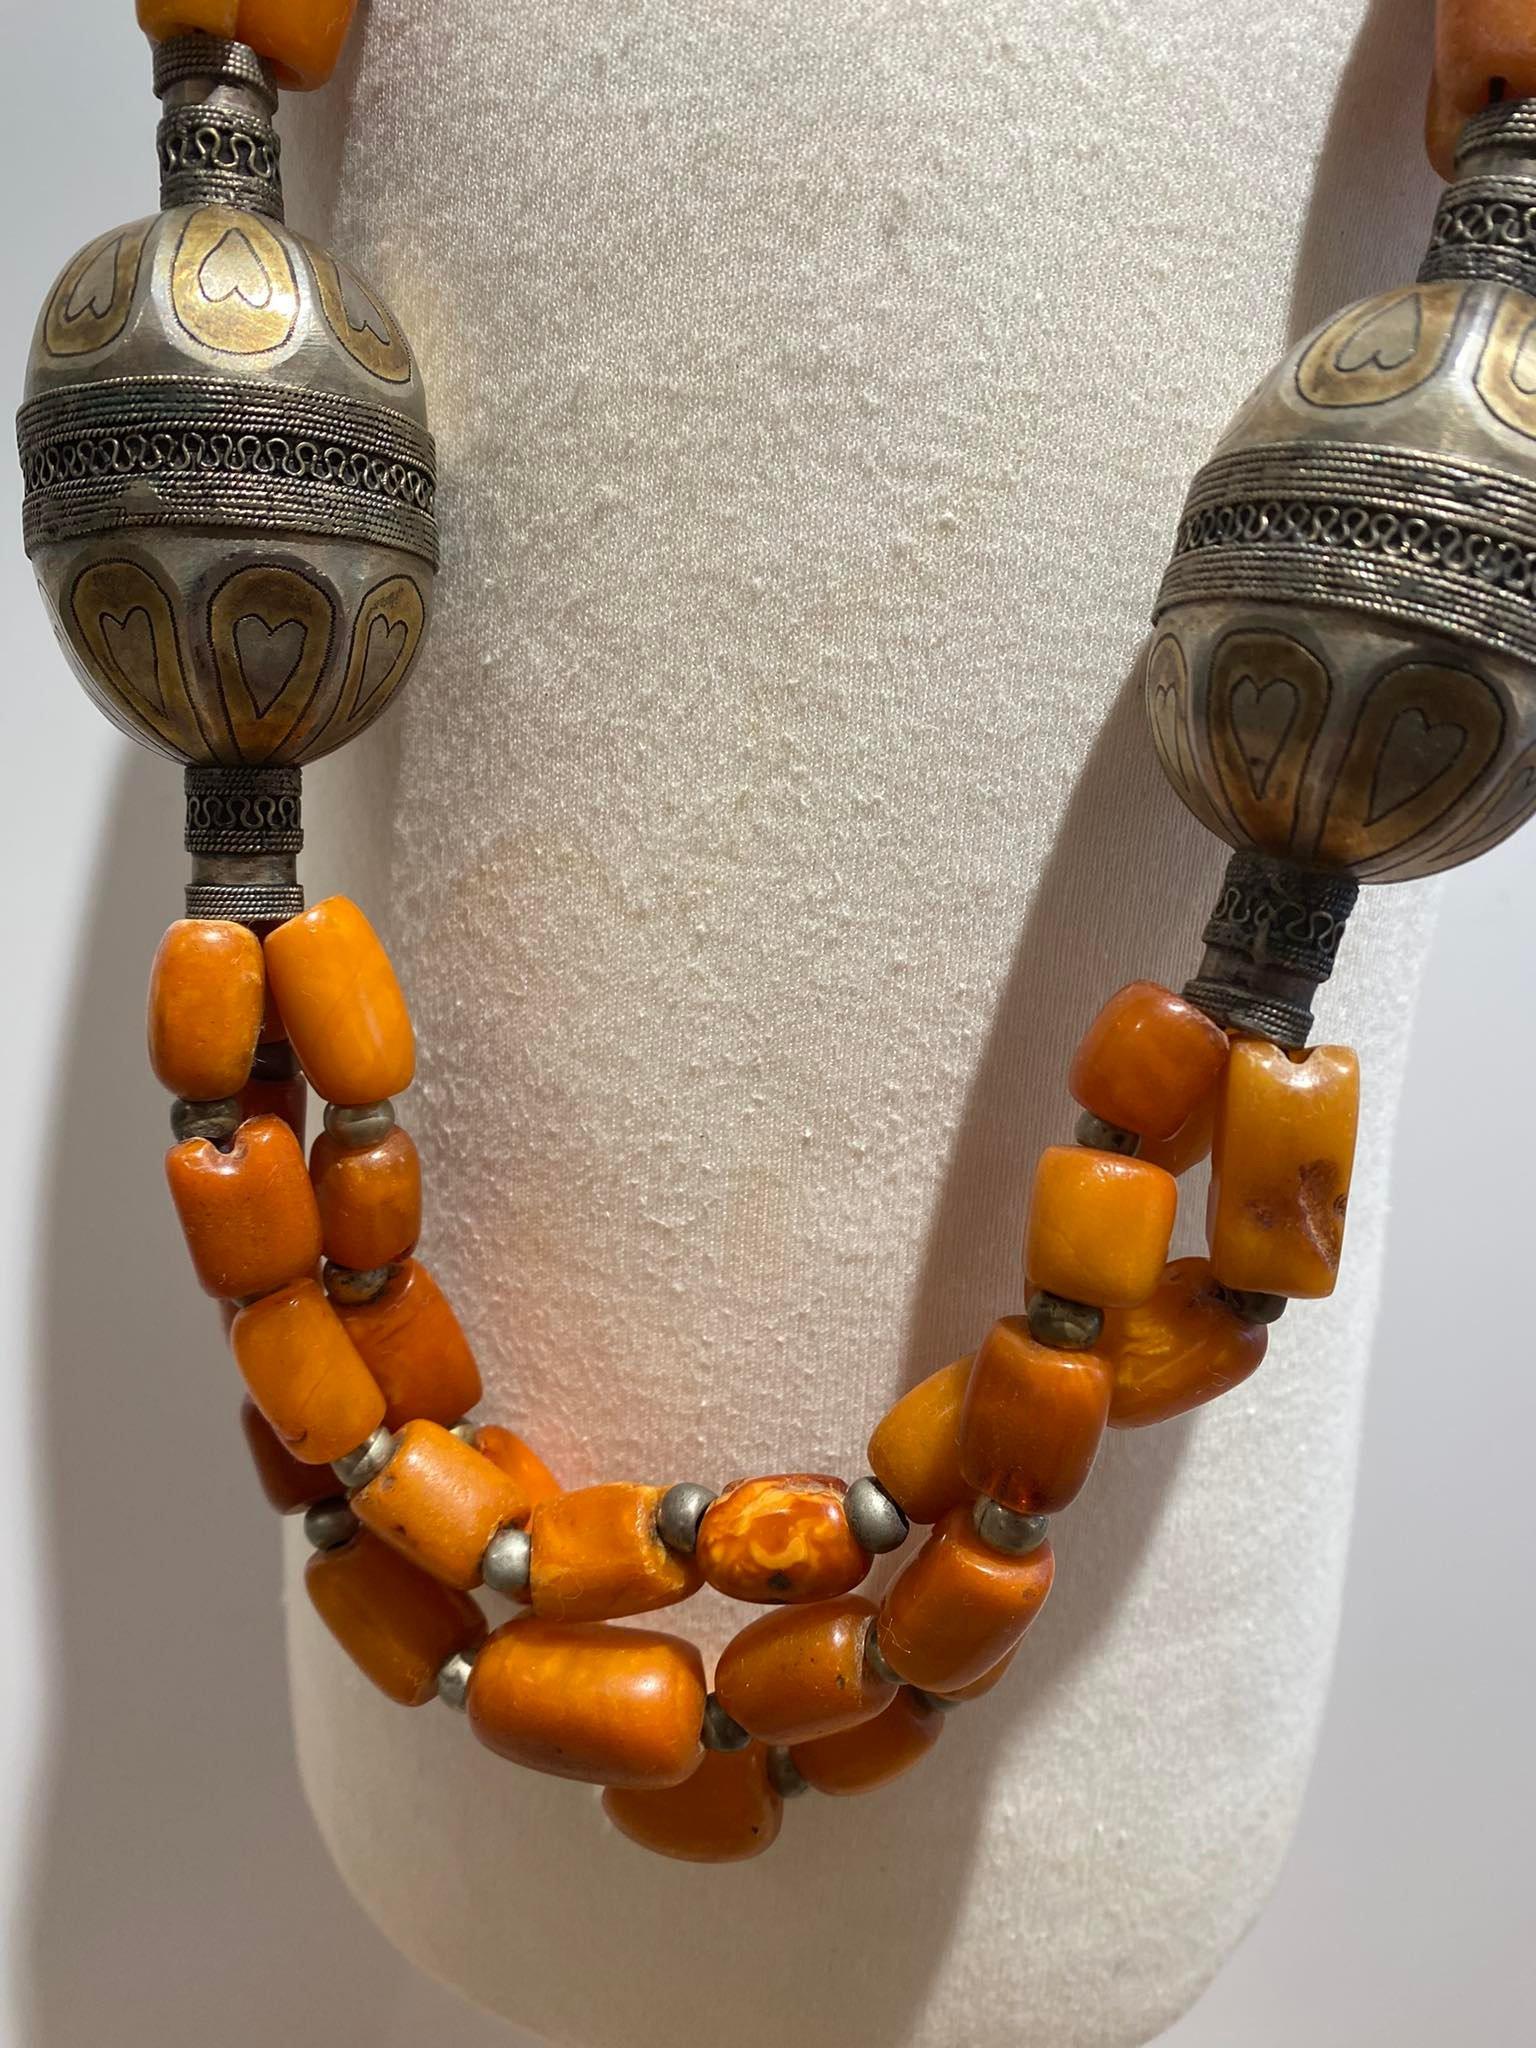  Antique Amber Necklace Yemen Afghanistan 18/19th Century Islamic Art silver  For Sale 3